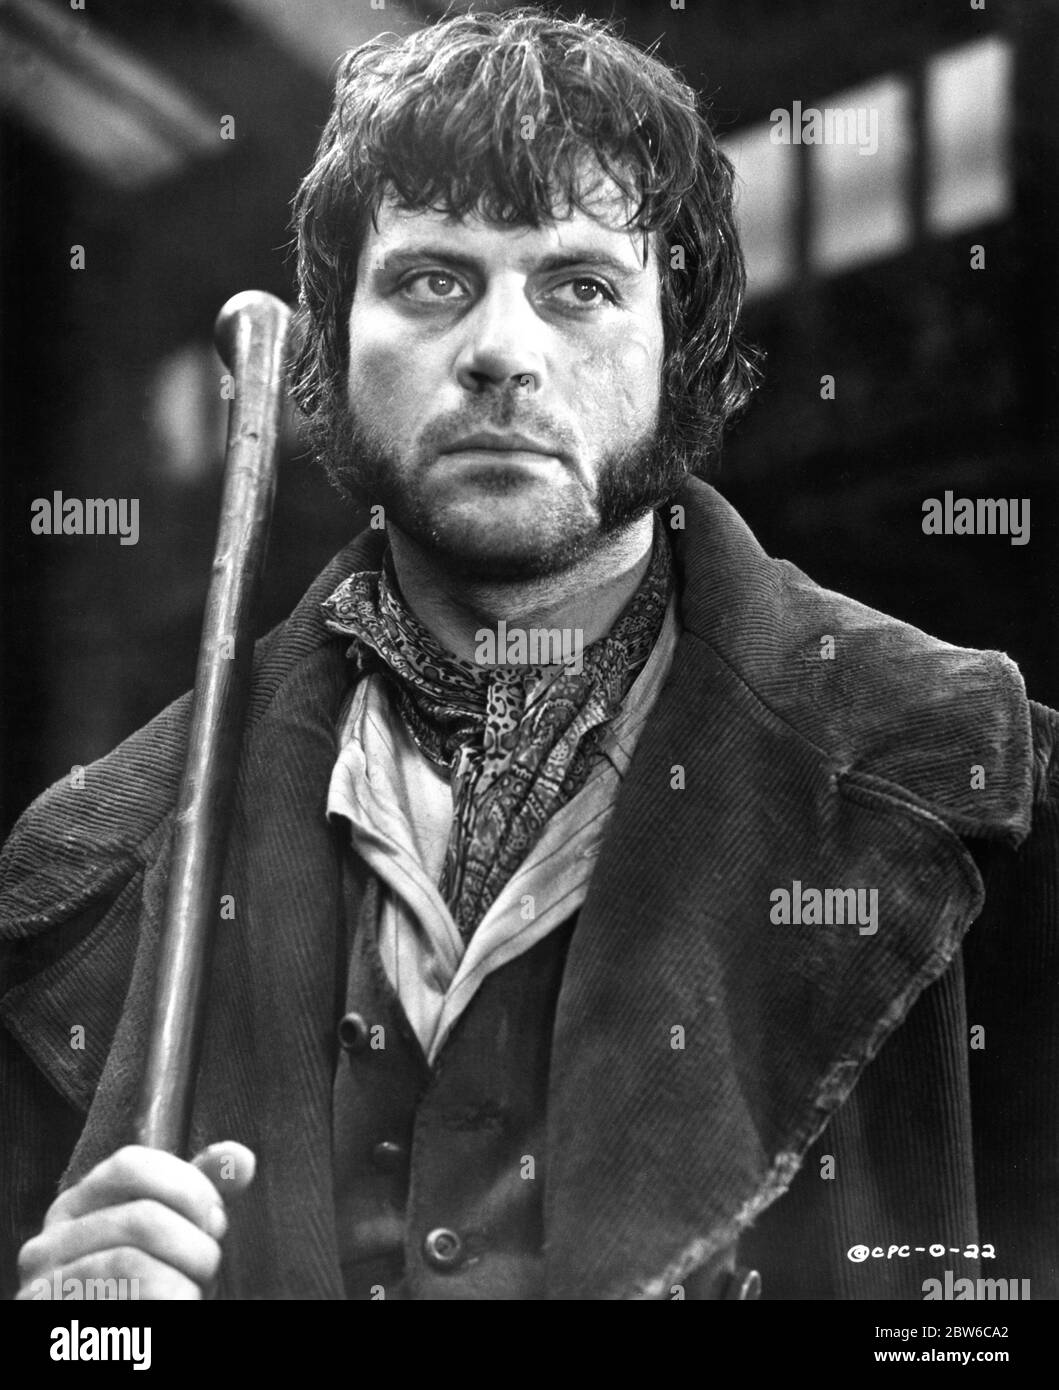 OLIVER REED Portrait as Bill Sikes in OLIVER ! 1968 director CAROL REED musical by Lionel Bart adapted from novel Oliver Twist by Charles Dickens Romulus Films / Warwick Film Productions / Columbia Pictures Corporation Stock Photo